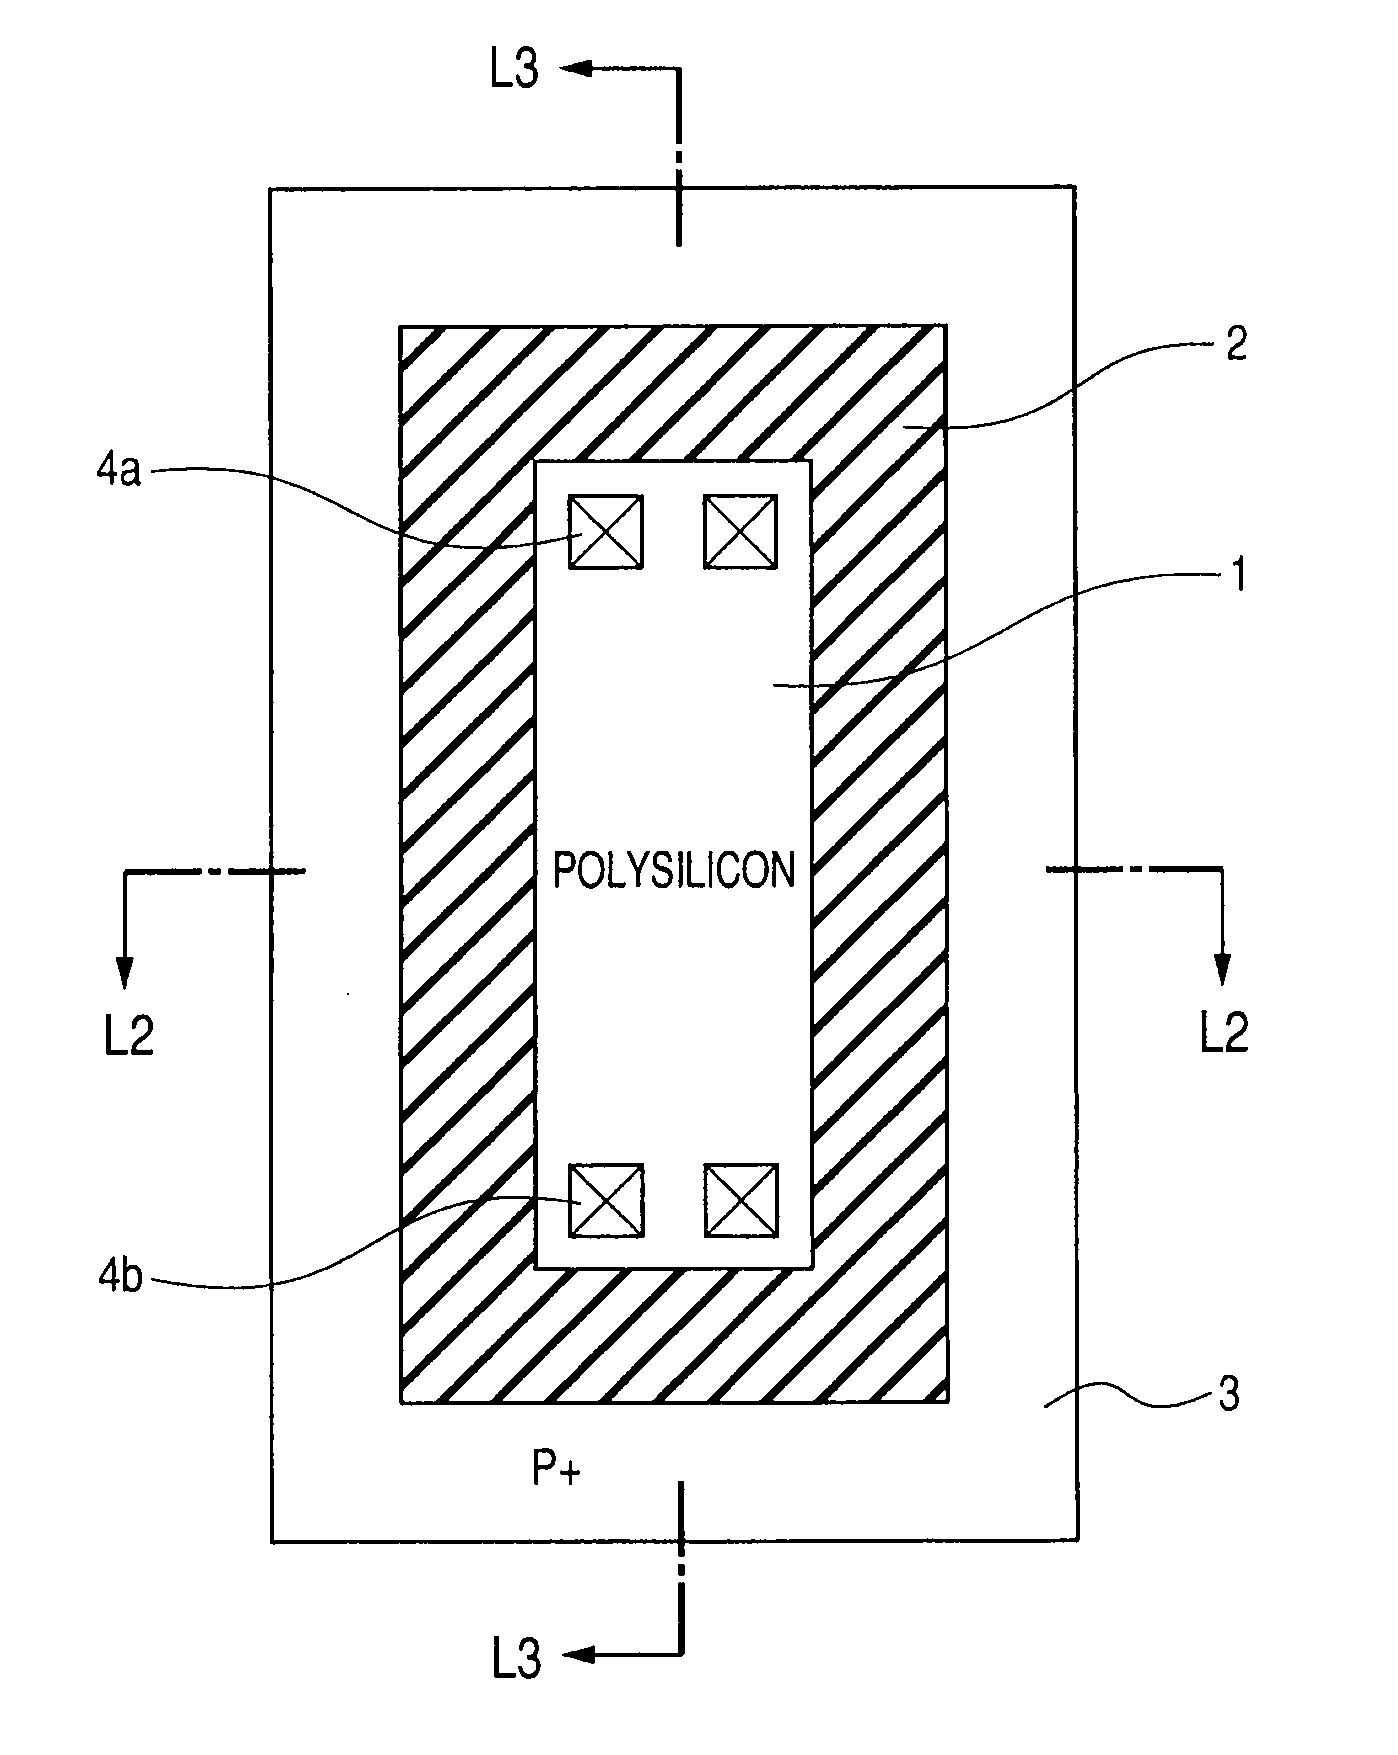 Semiconductor device having resistors with a biased substrate voltage